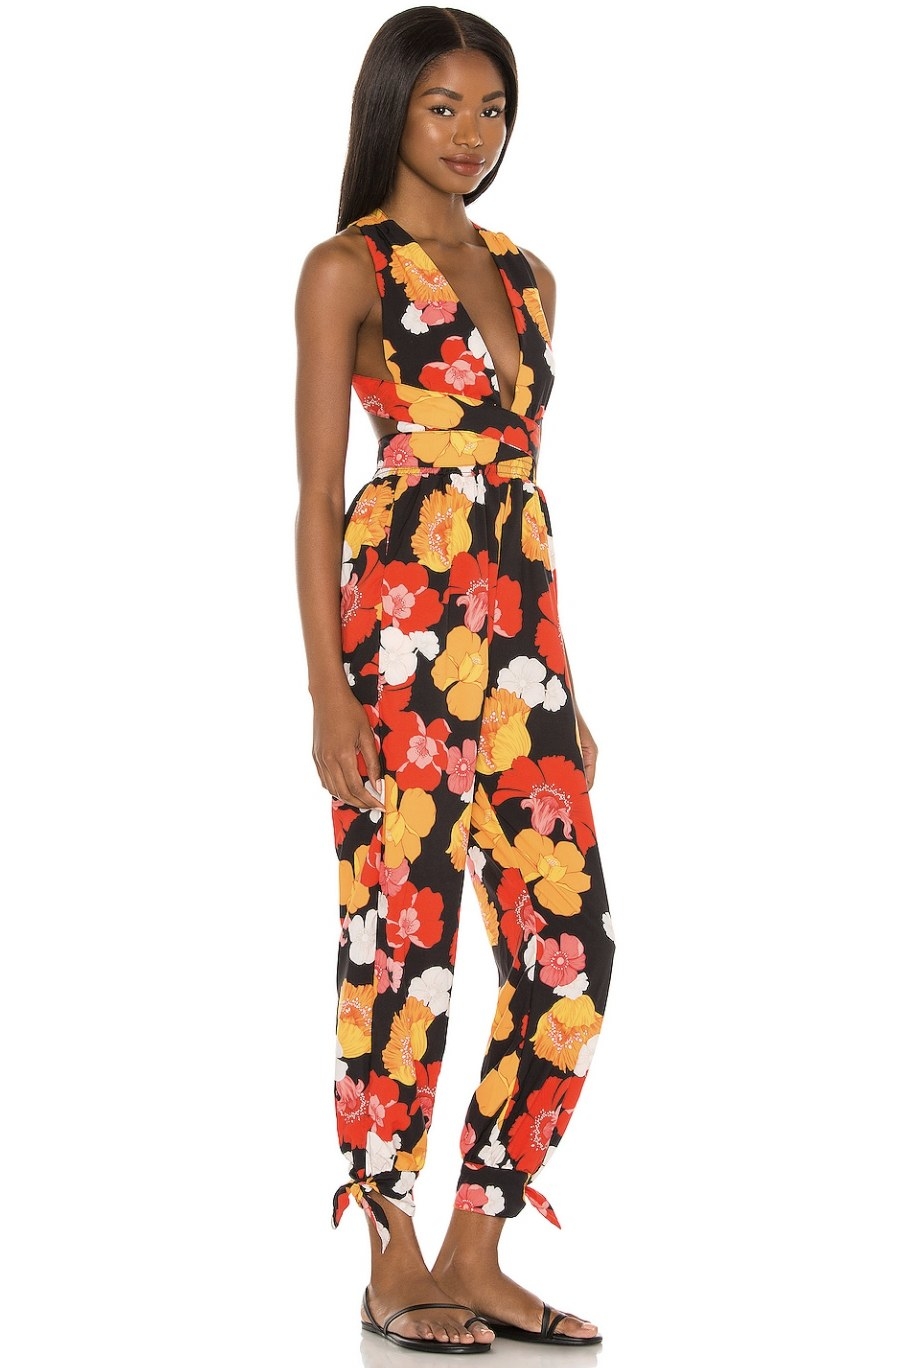 Model wearing the black jumpsuit with red and yellow flowers